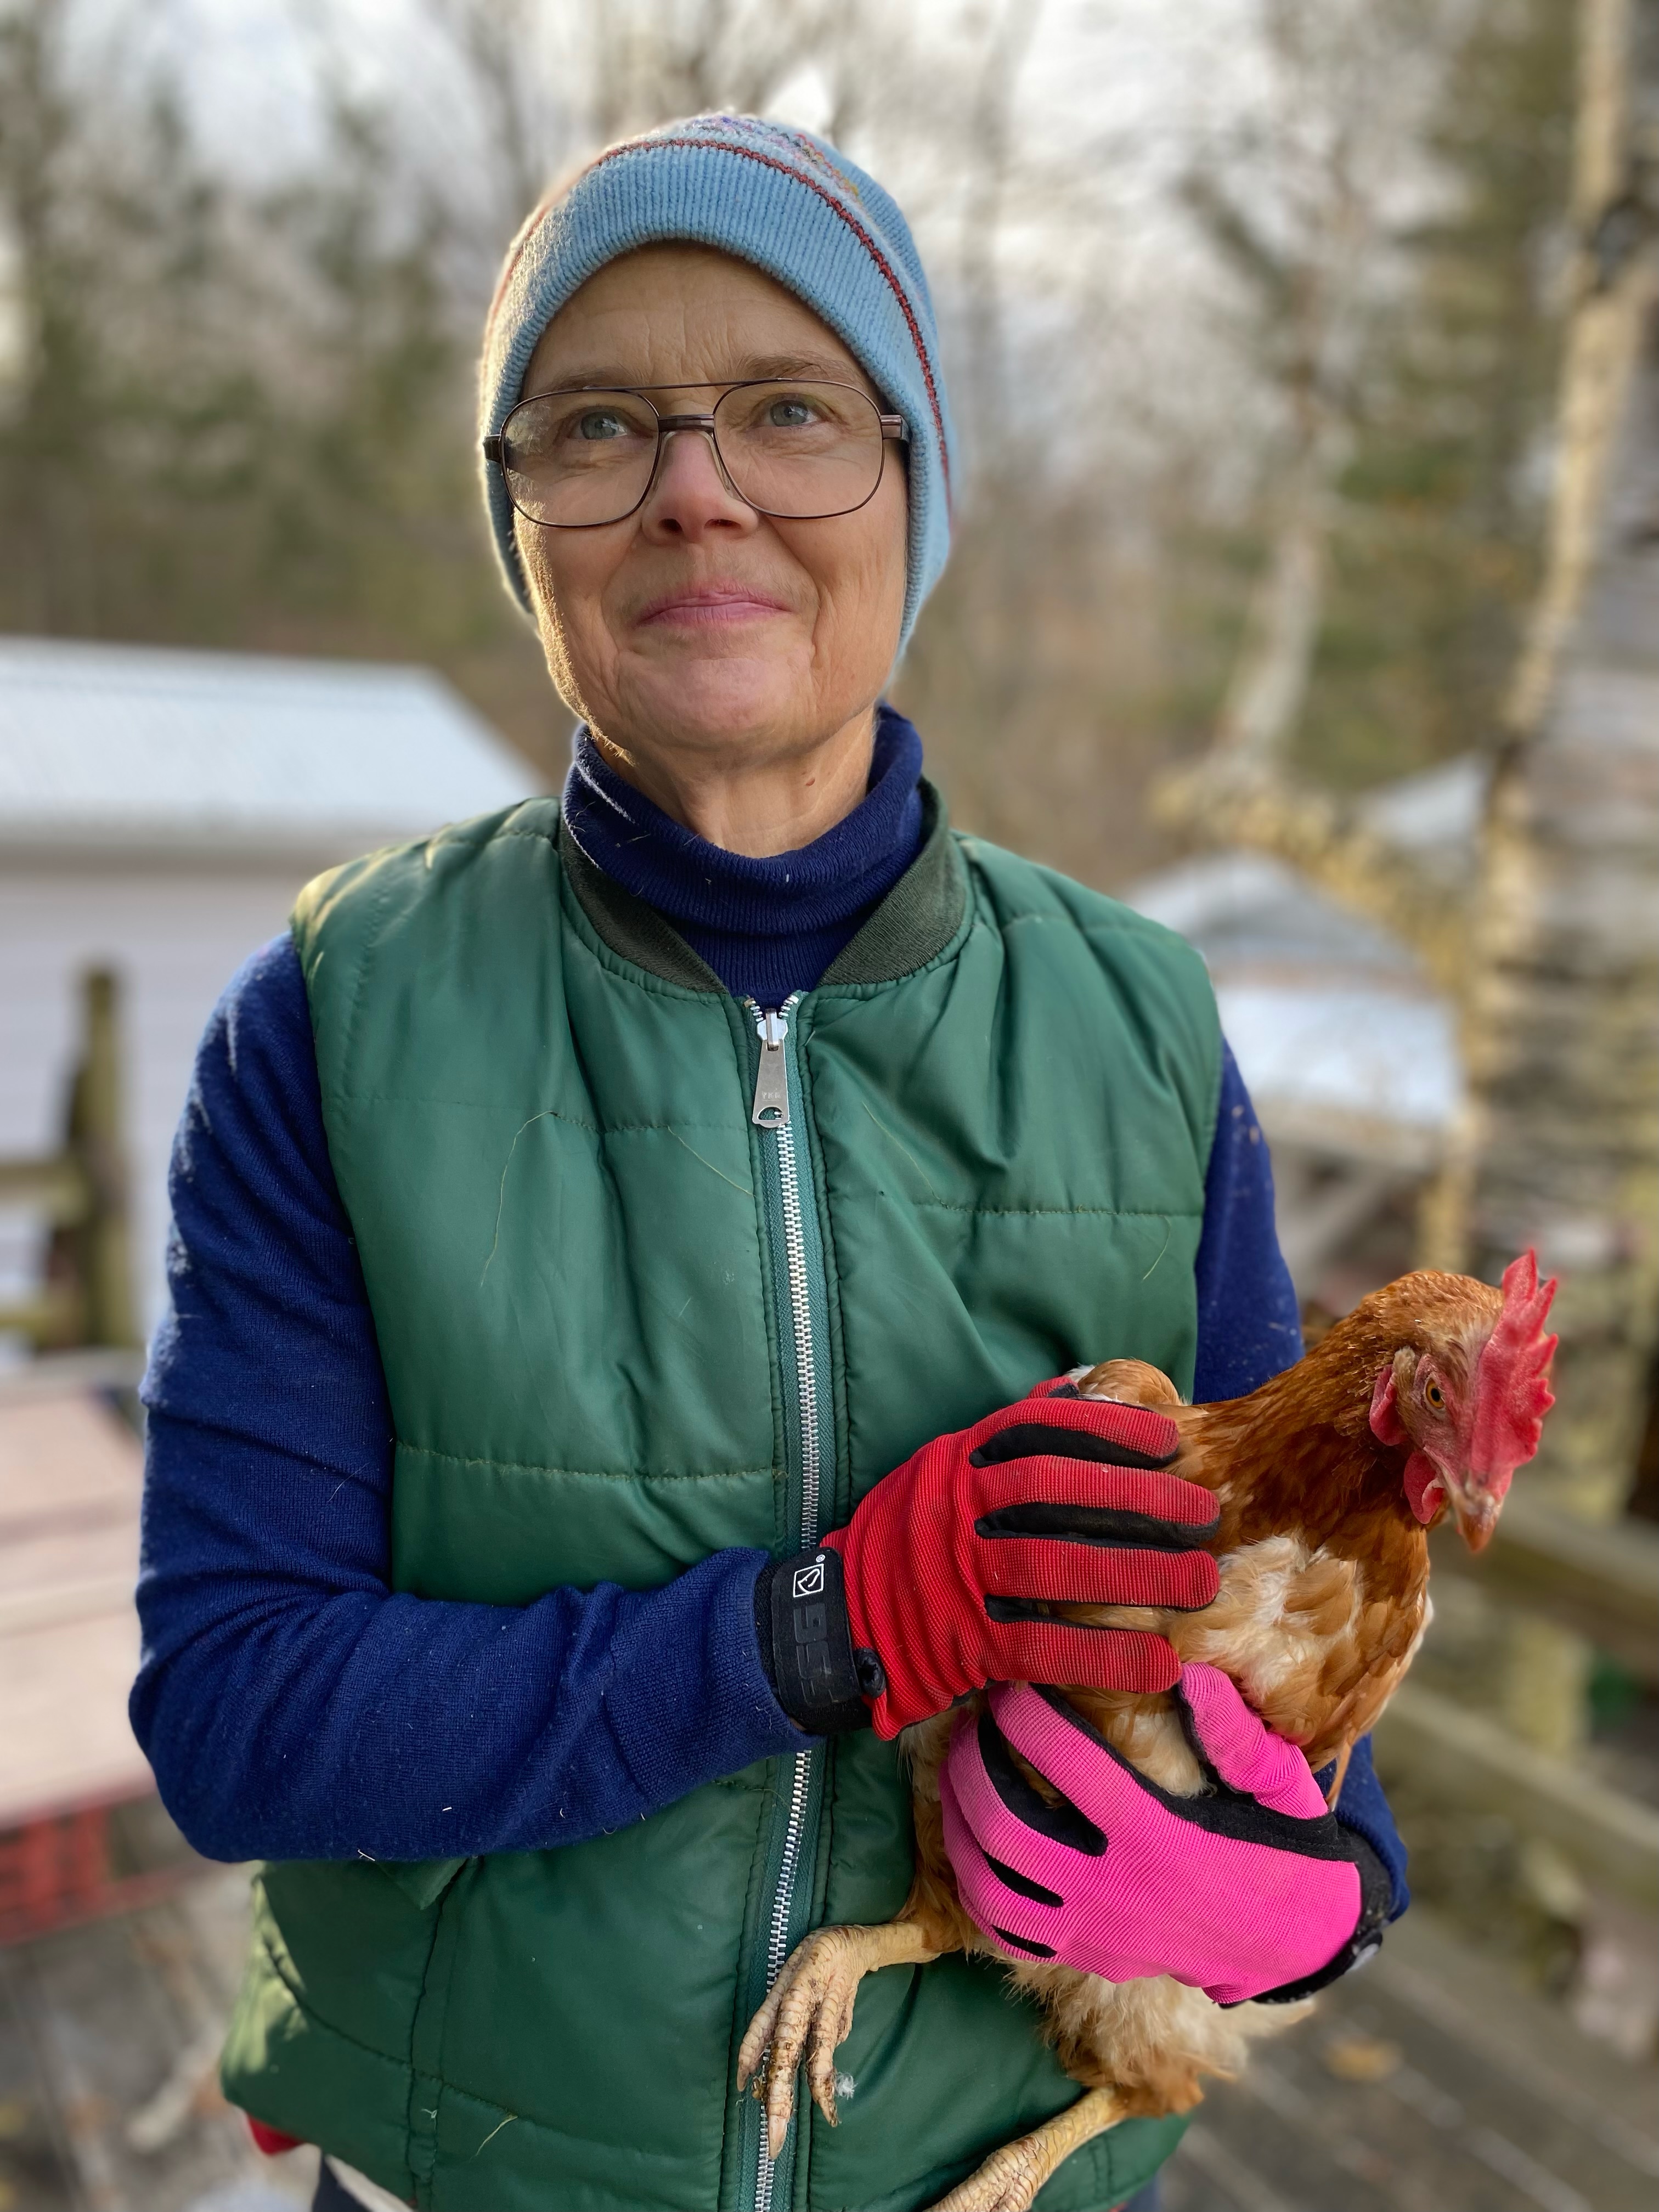 A photograph of a woman with glasses and colourful winter clothing standing outside in snowy rural area holding a chicken.